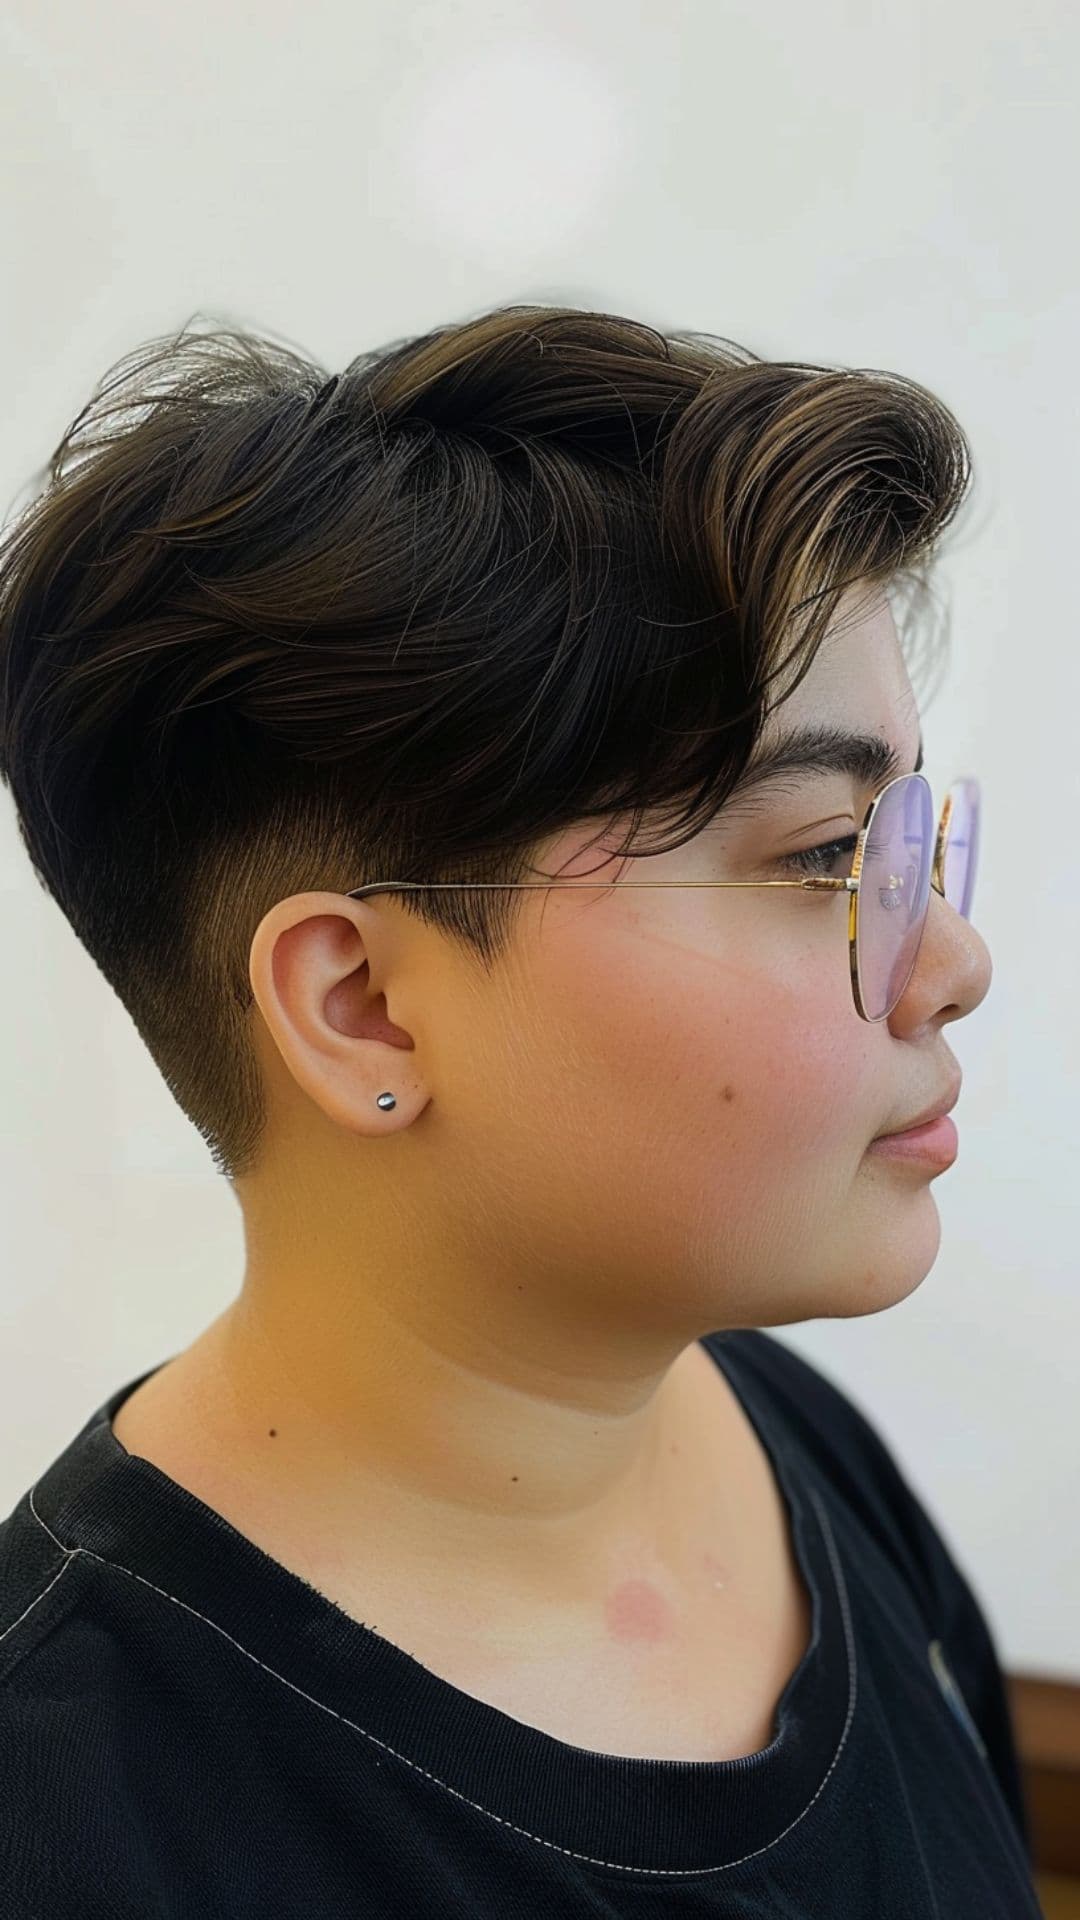 A woman modelling a pixie cut with tapered sides.